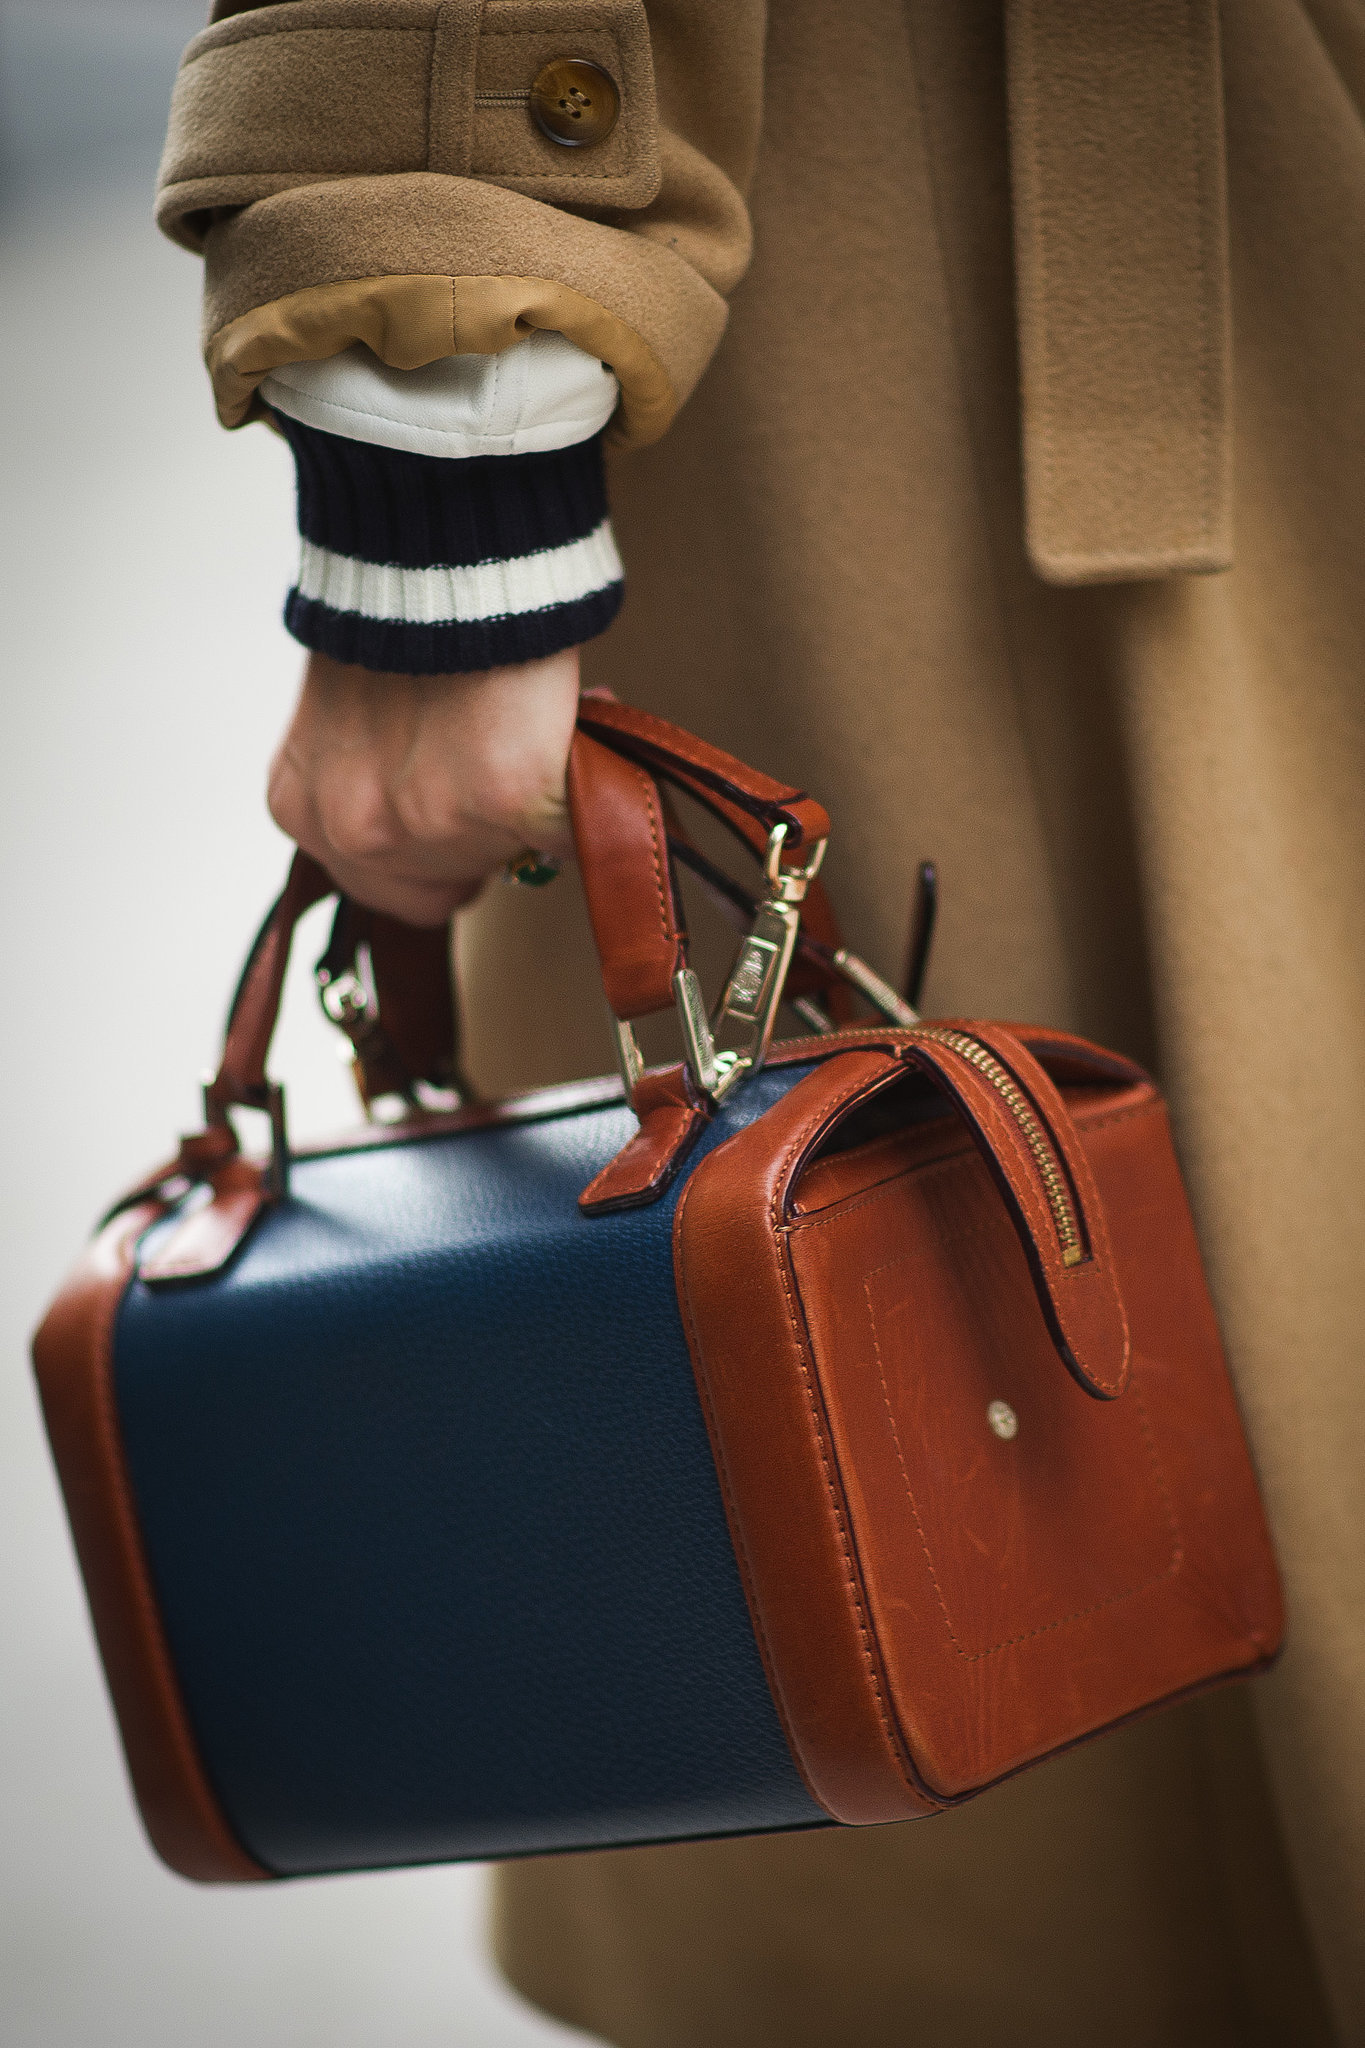 We're smitten with her classic carry-all. 
